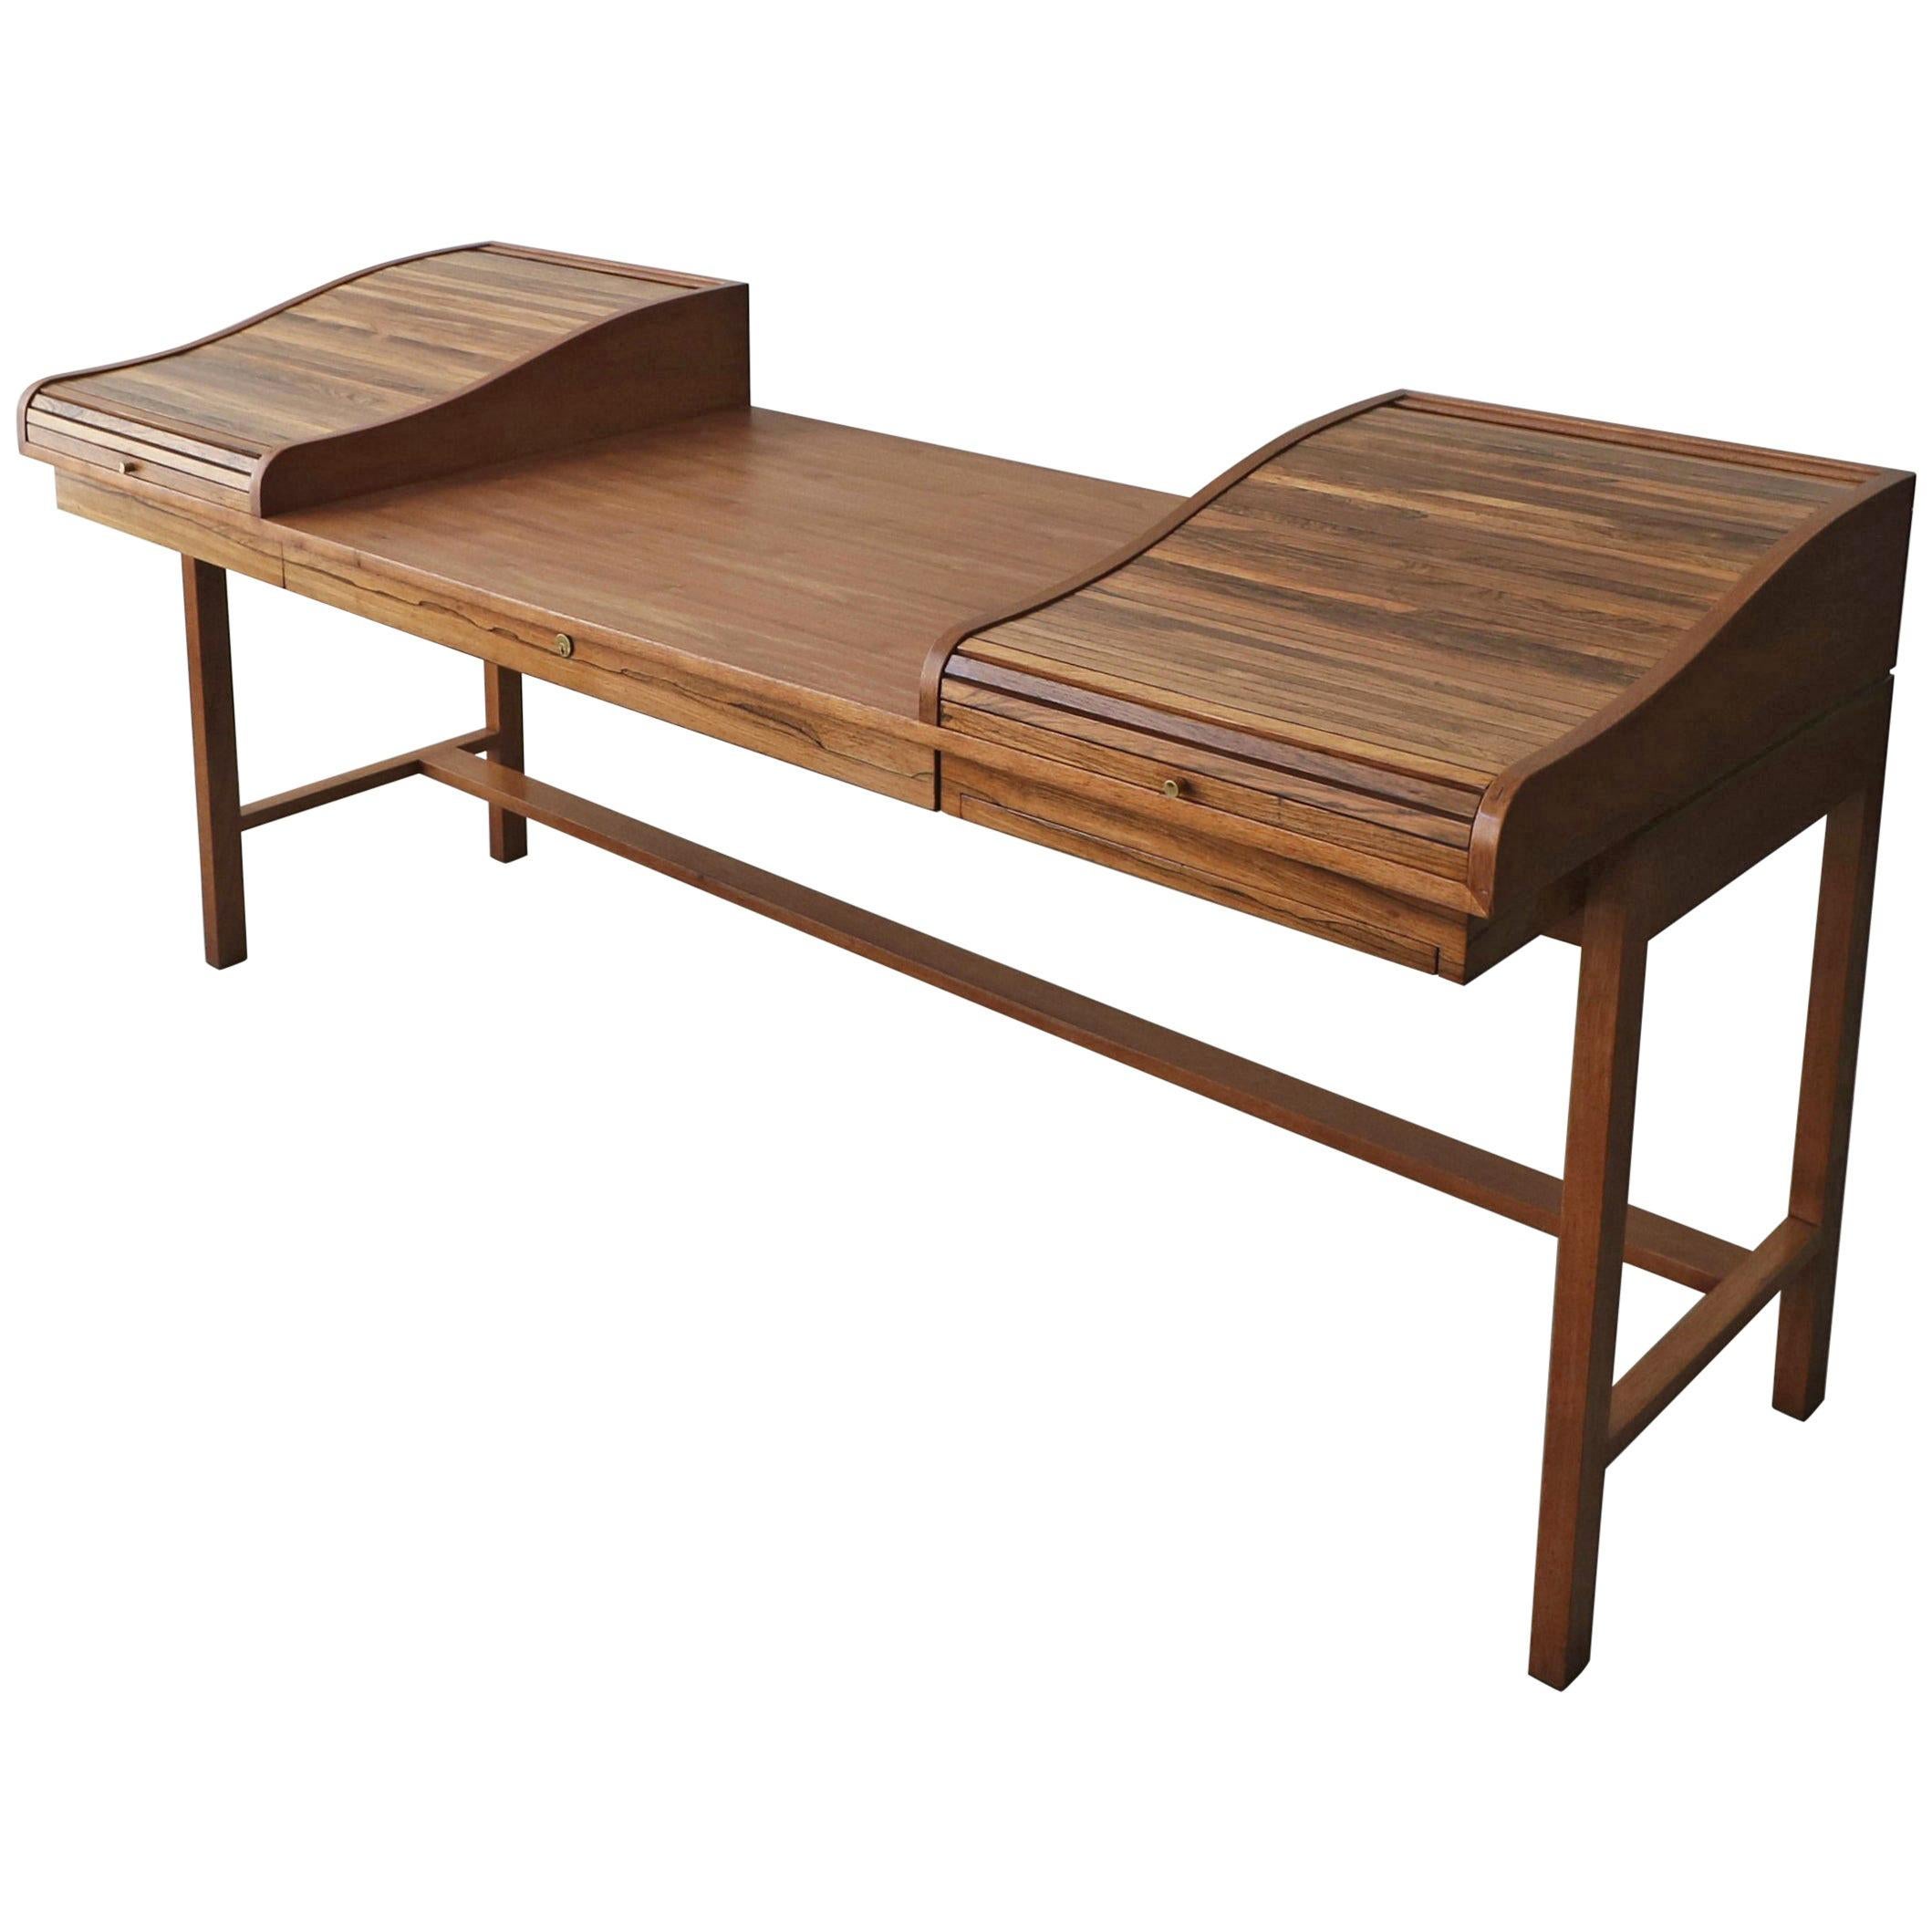 Customized Midcentury Rosewood and Walnut Desk by Edward Wormley for Dunbar